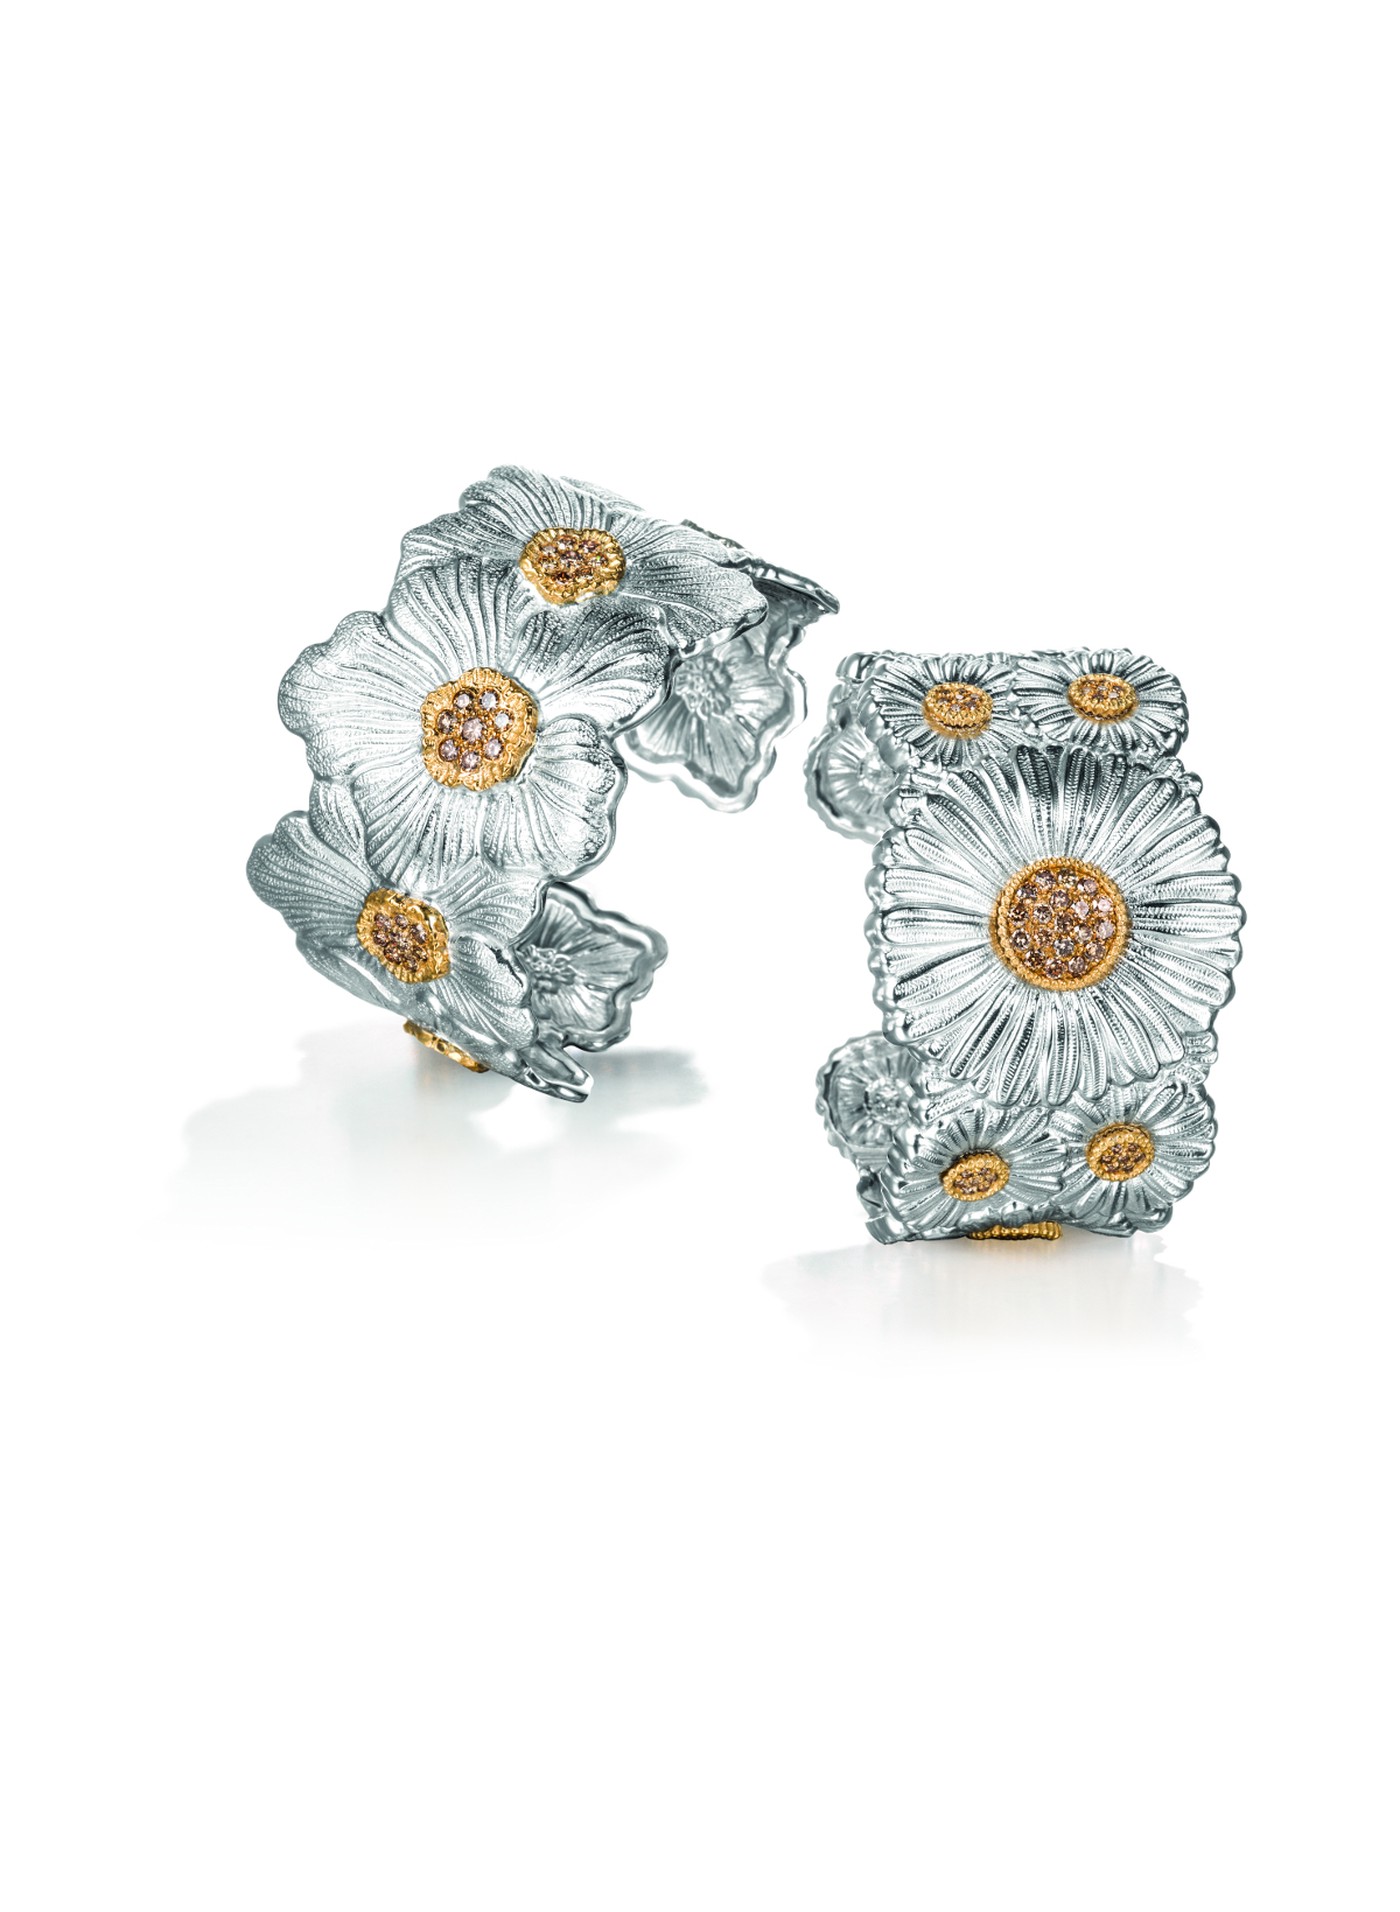 map[en:Blossoms Daisy and Gardenia bracelets in silver with vermeil and brown diamonds fr:Bracelets Blossoms Daisy et Gardenia en argent et vermeil sertis de diamants bruns nl:Blossoms Daisy en Gardenia ringen in zilver met vermeil en bruine diamanten]